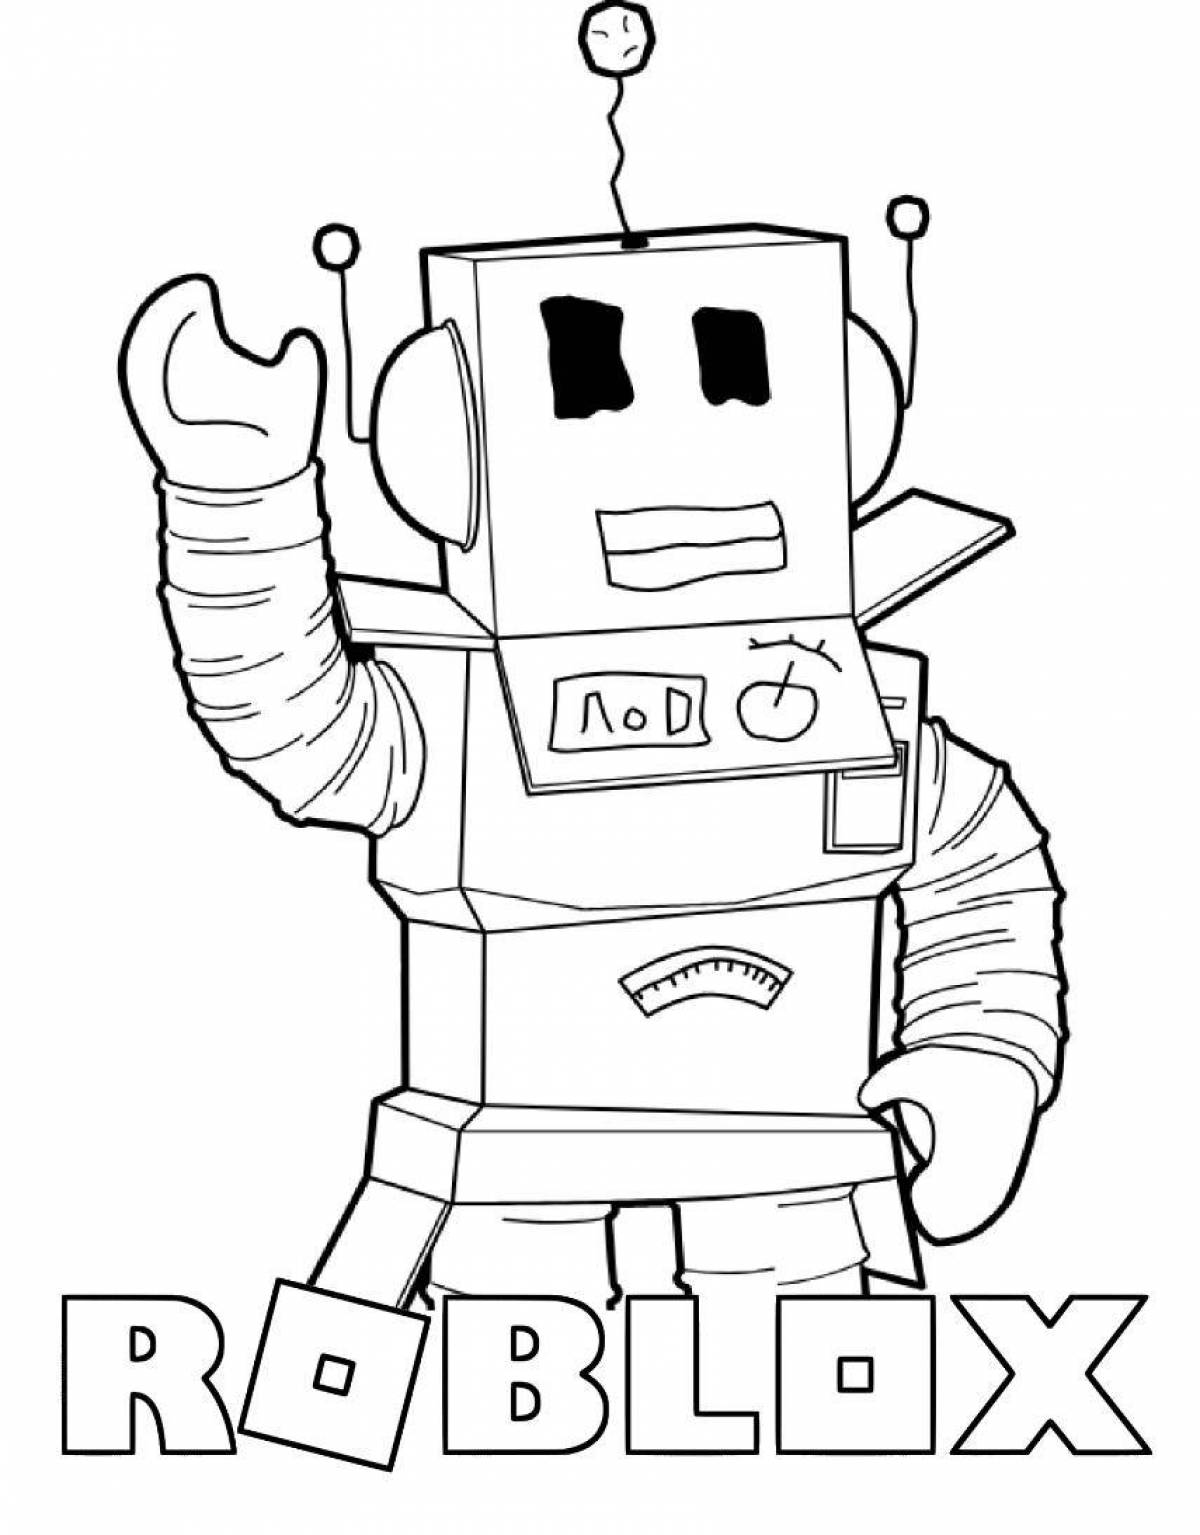 Joyful roblox characters coloring page